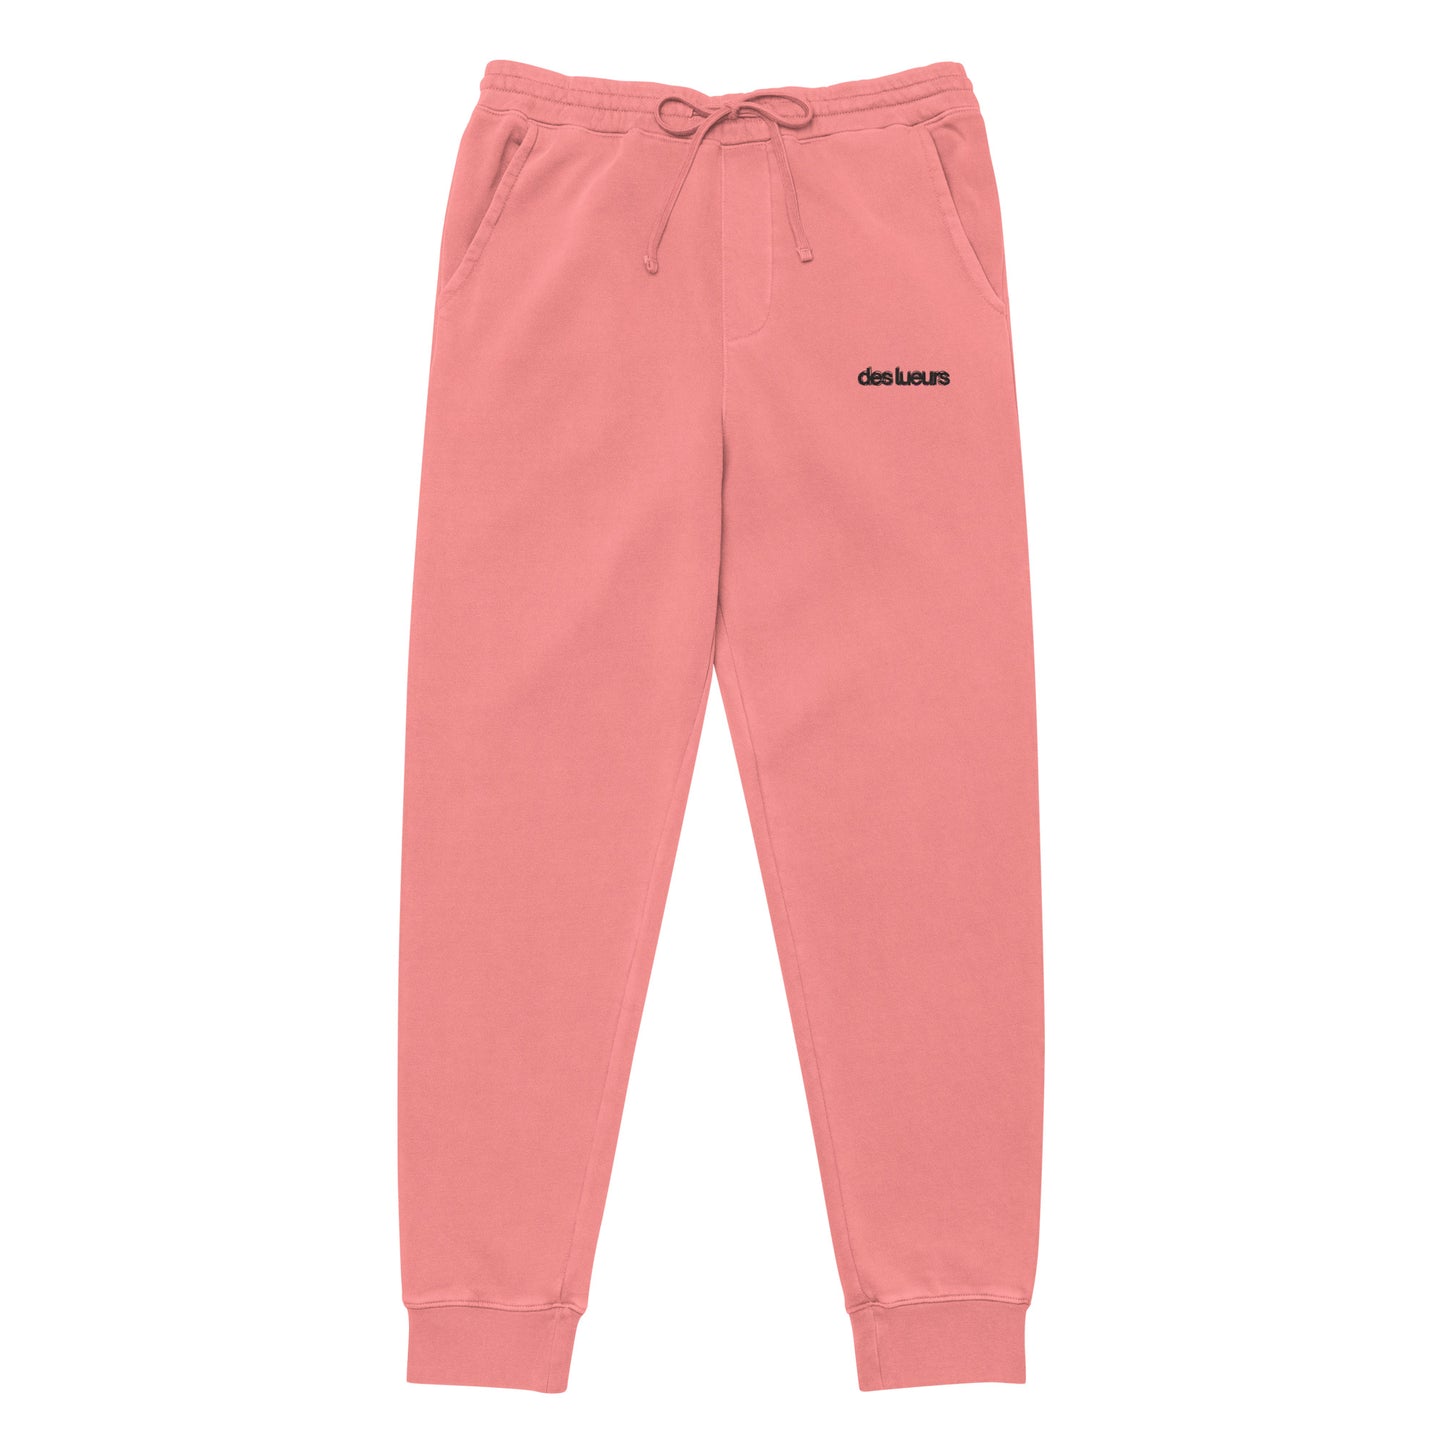 "the" embroidered sweats